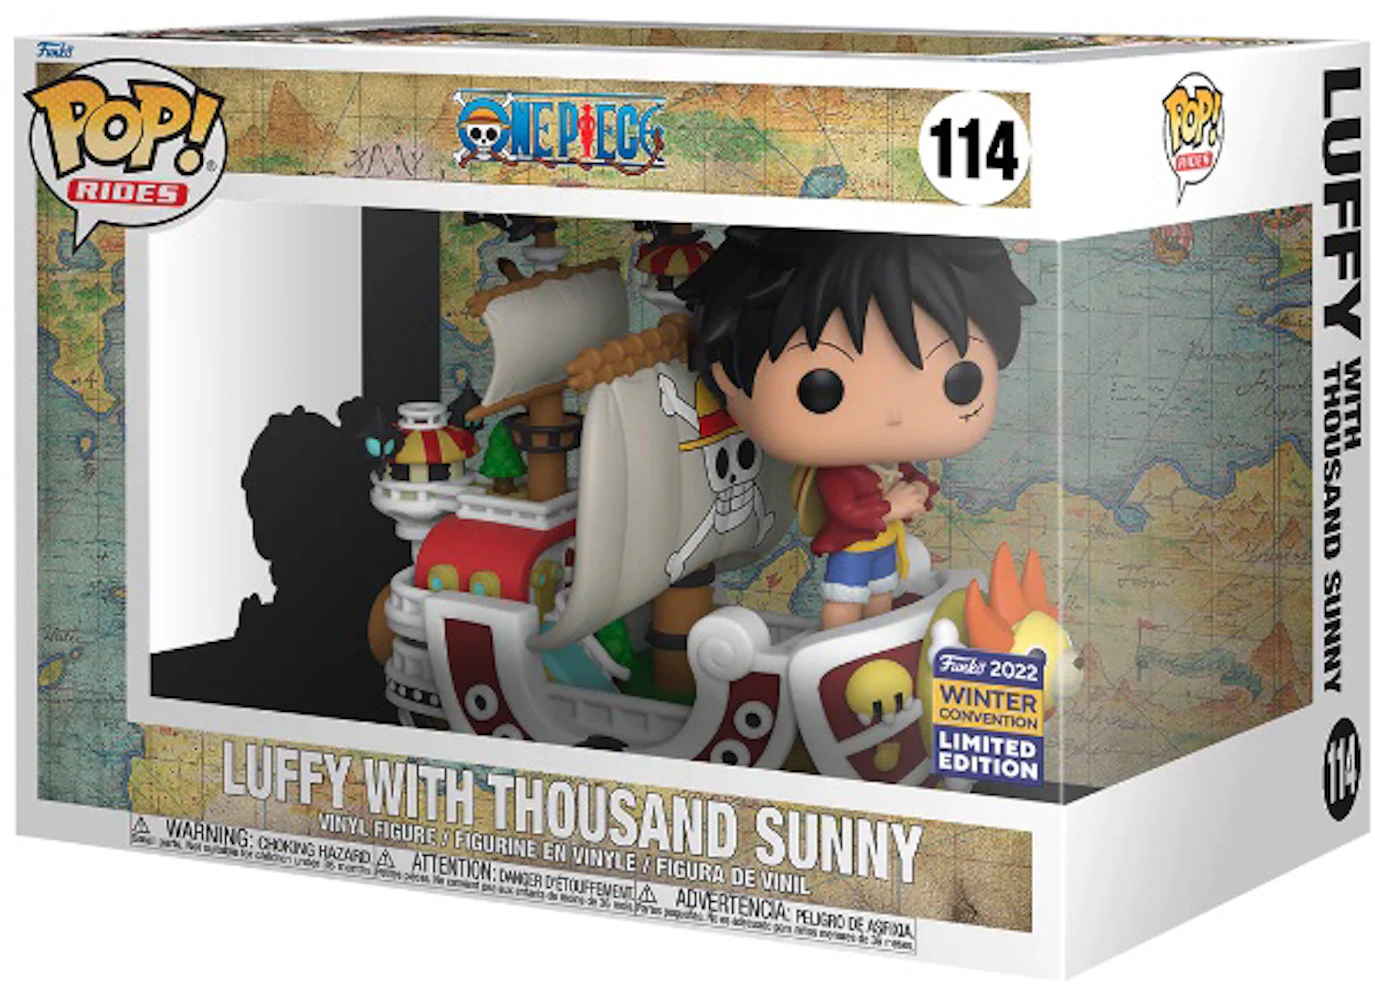 https://images.stockx.com/images/Funko-Pop-Rides-One-Piece-Luffy-with-Thousand-Sunny-2022-Winter-Convention-Exclusive-Figure-114.jpg?fit=fill&bg=FFFFFF&w=700&h=500&fm=webp&auto=compress&q=90&dpr=2&trim=color&updated_at=1669966005